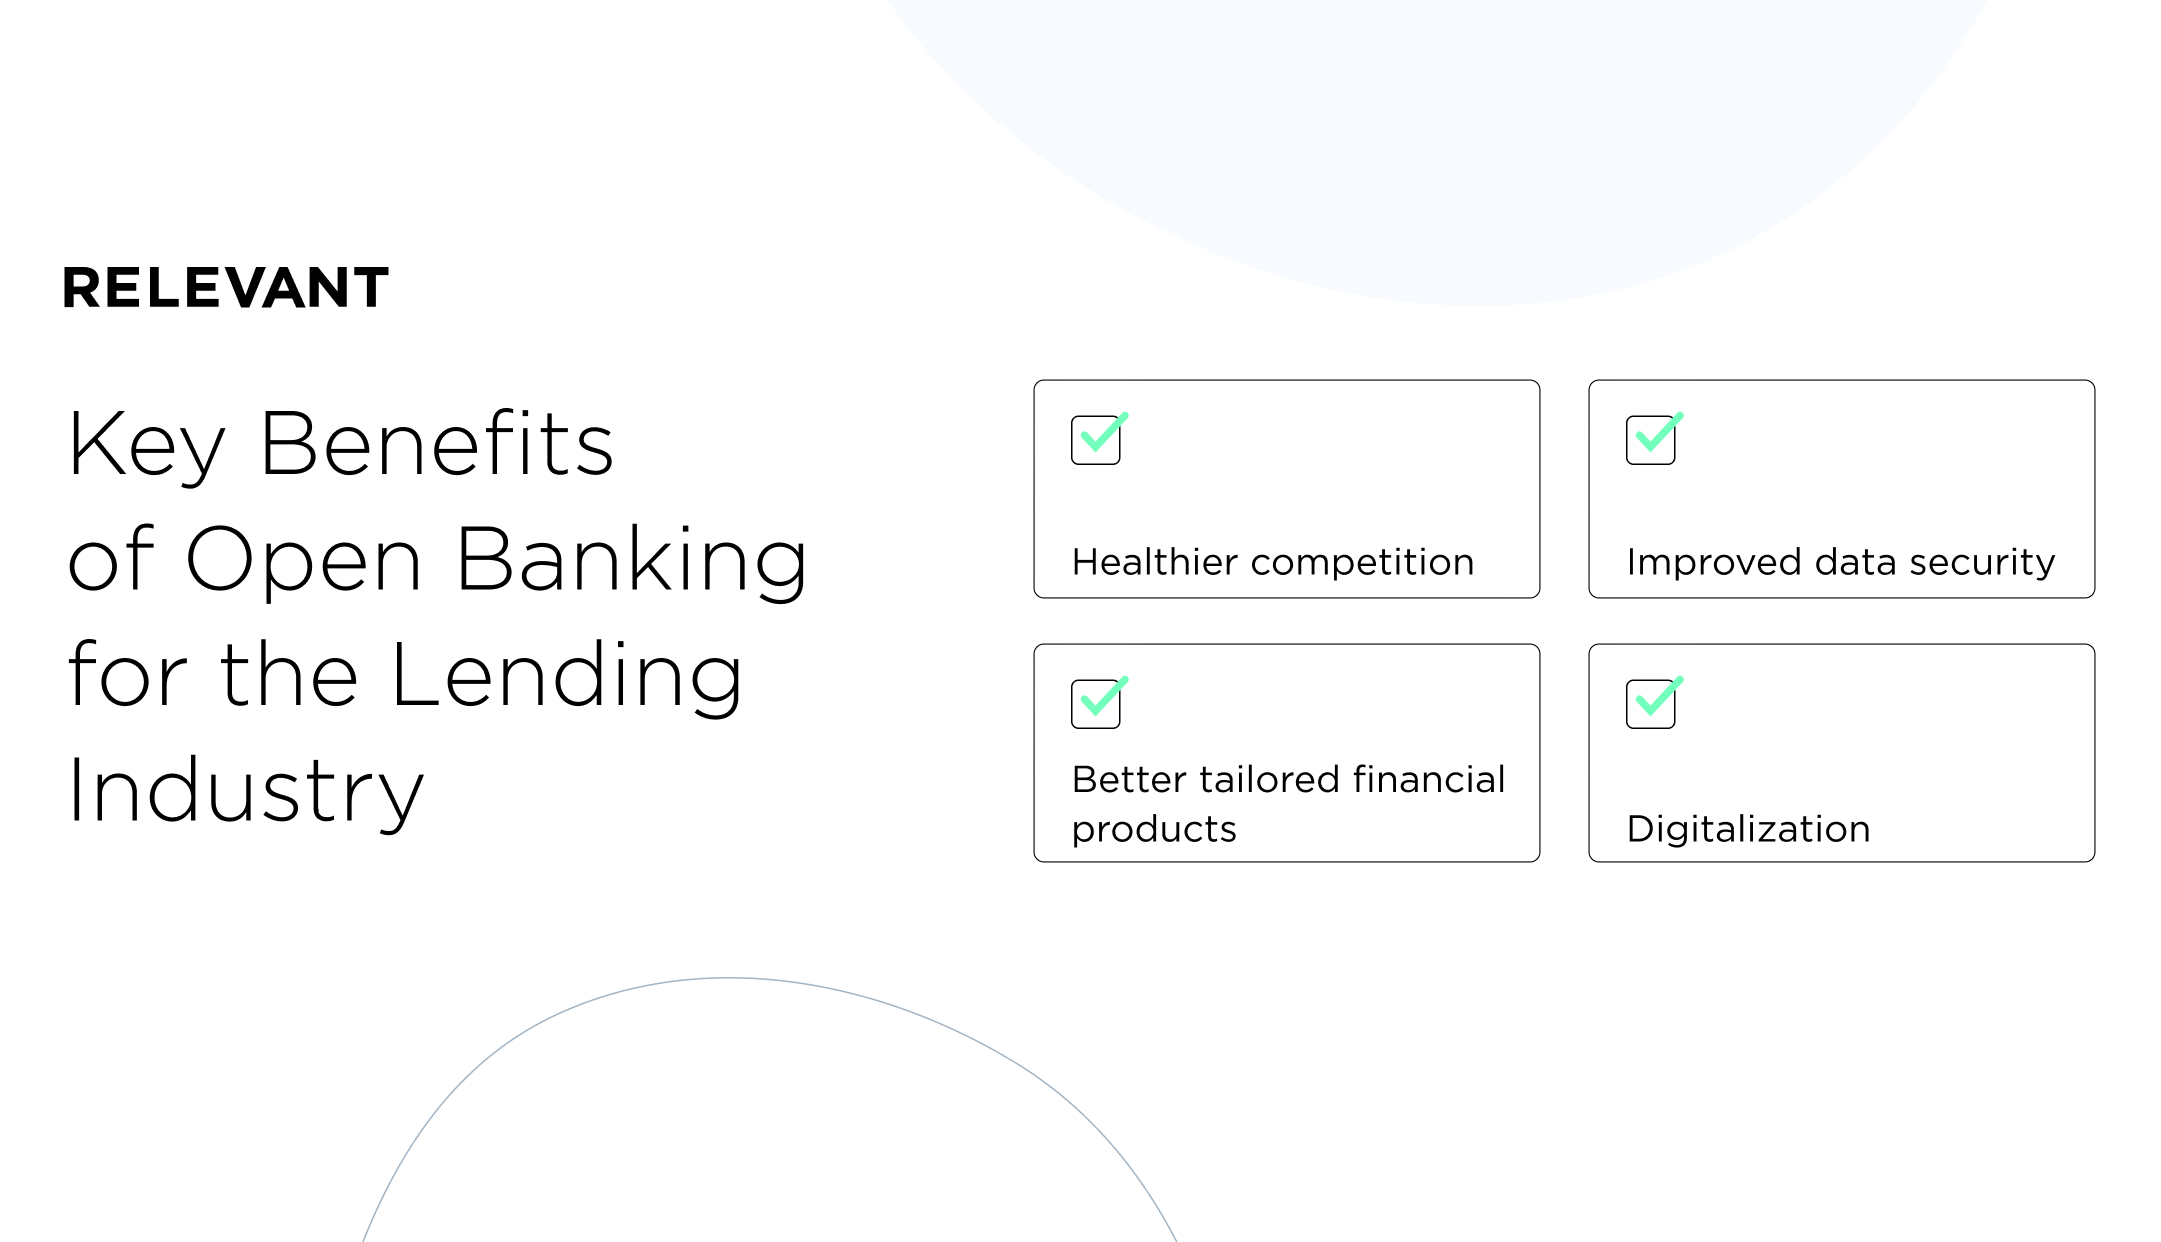 Key Benefits of Open Banking for the Lending Industry